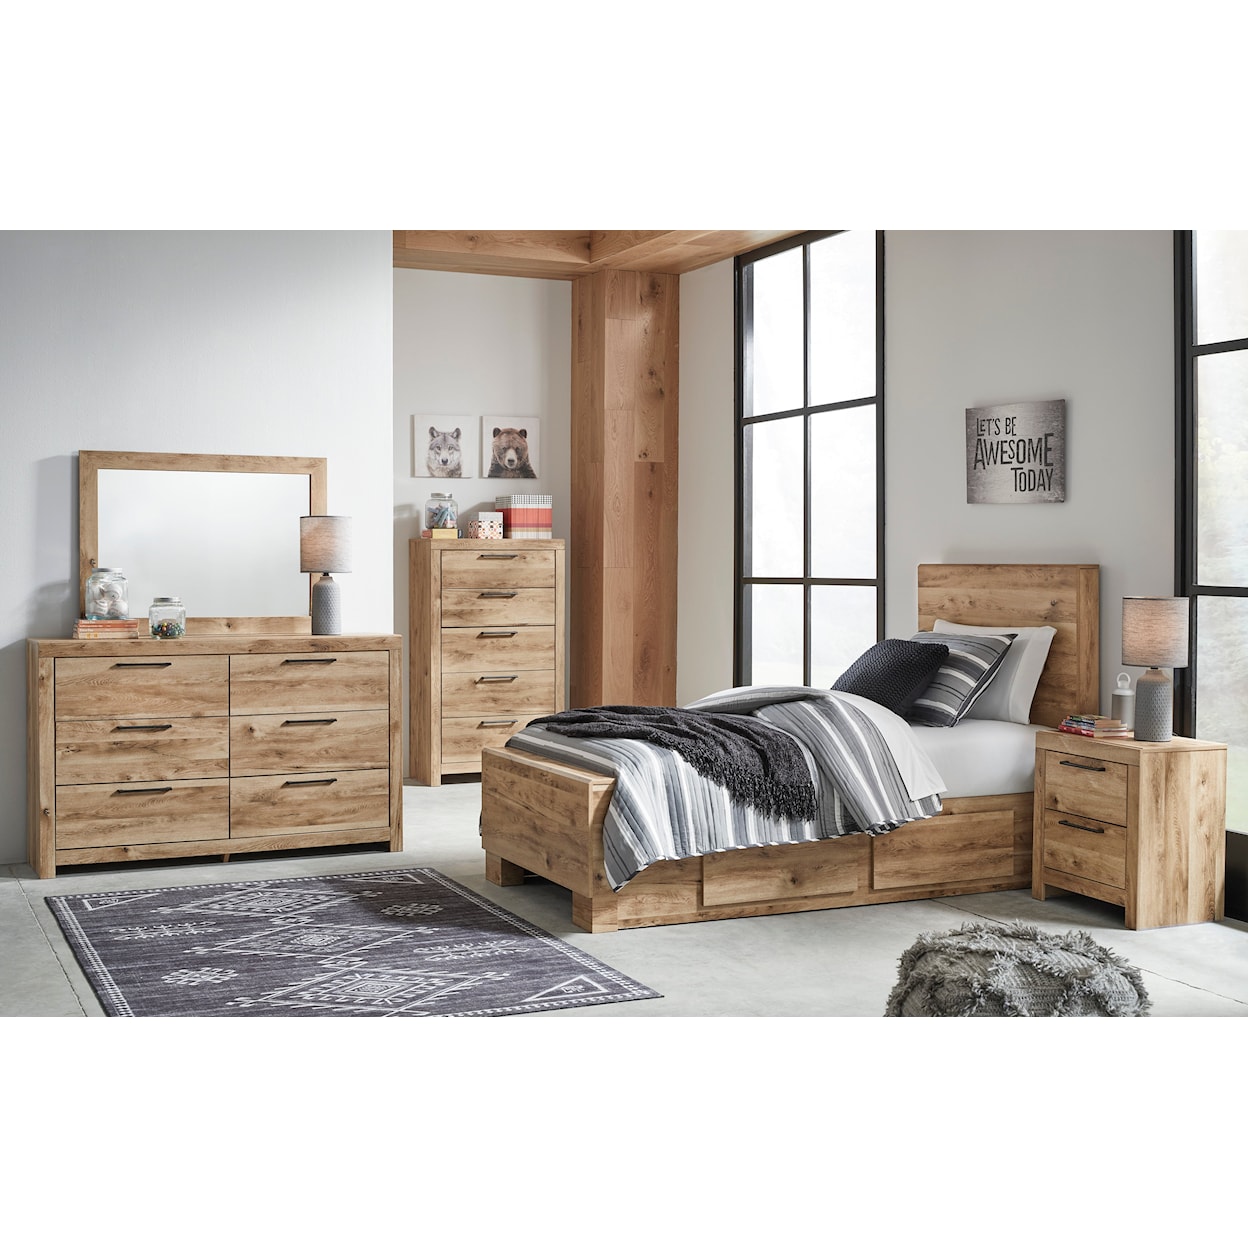 Signature Design by Ashley Furniture Hyanna Twin Bedroom Set